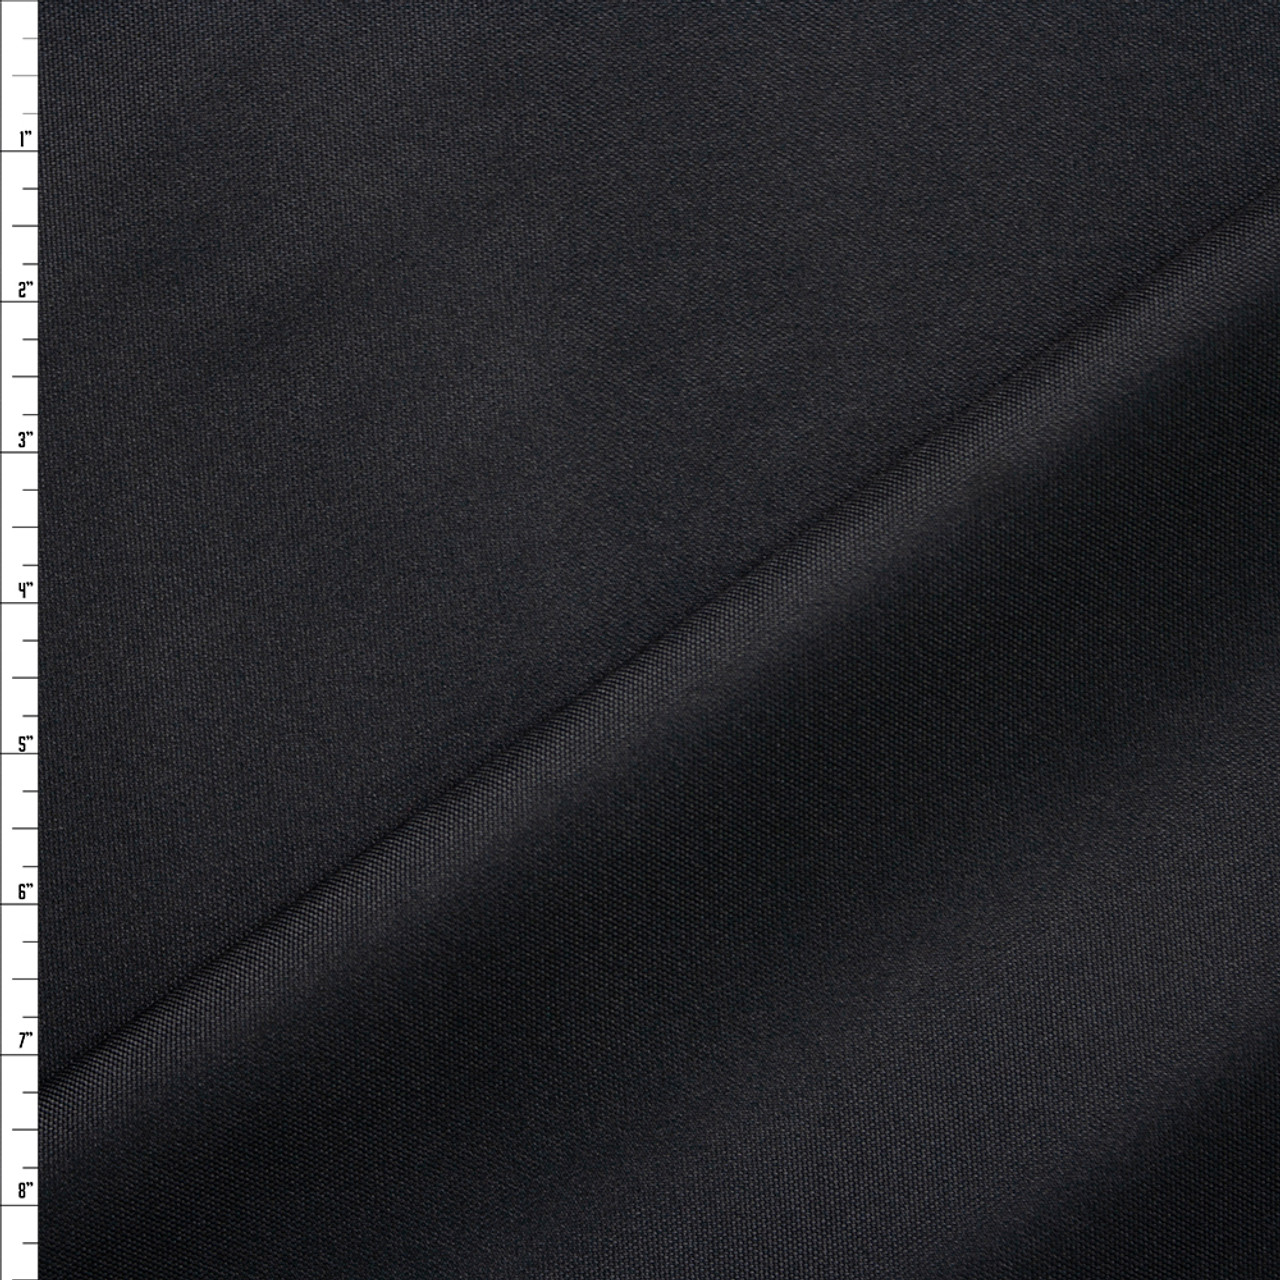 Canvas fabric black per meter at cheap prices.